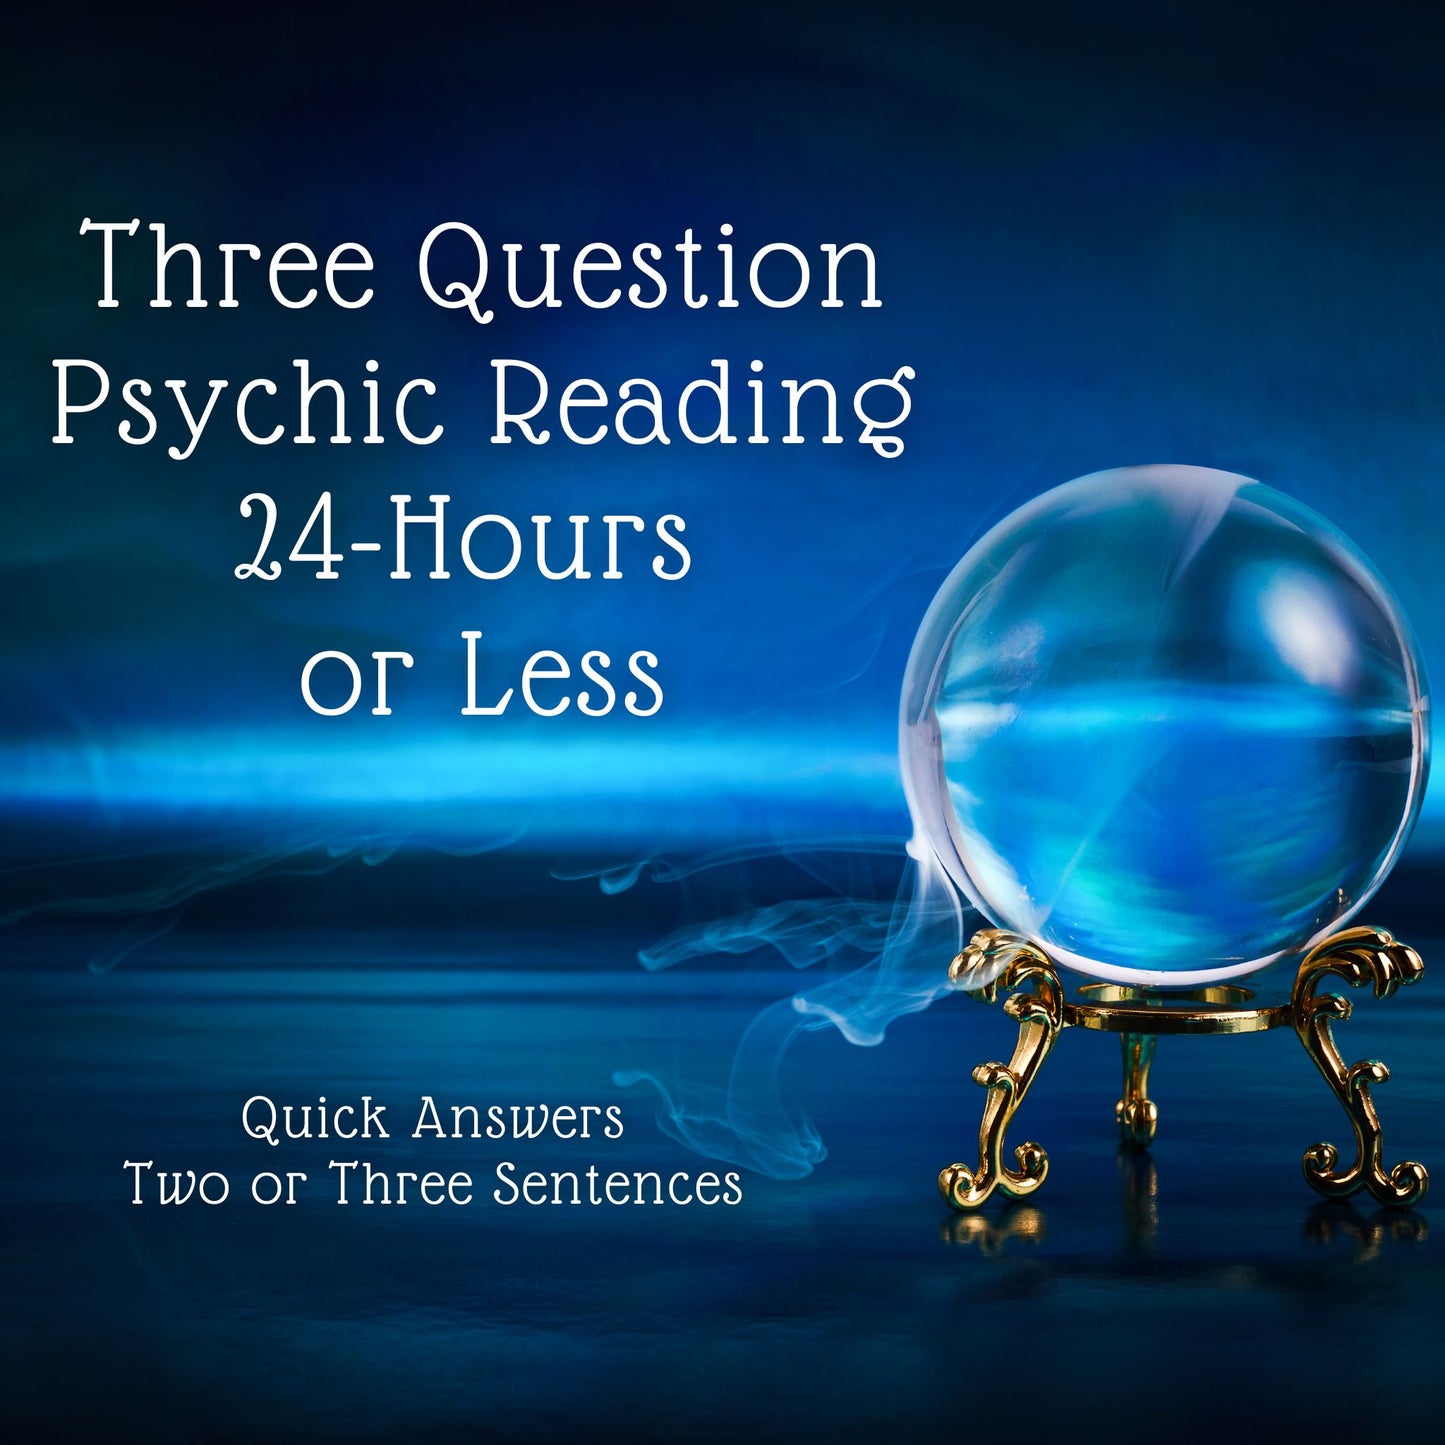 Three Question Psychic Reading 24-Hours or Less